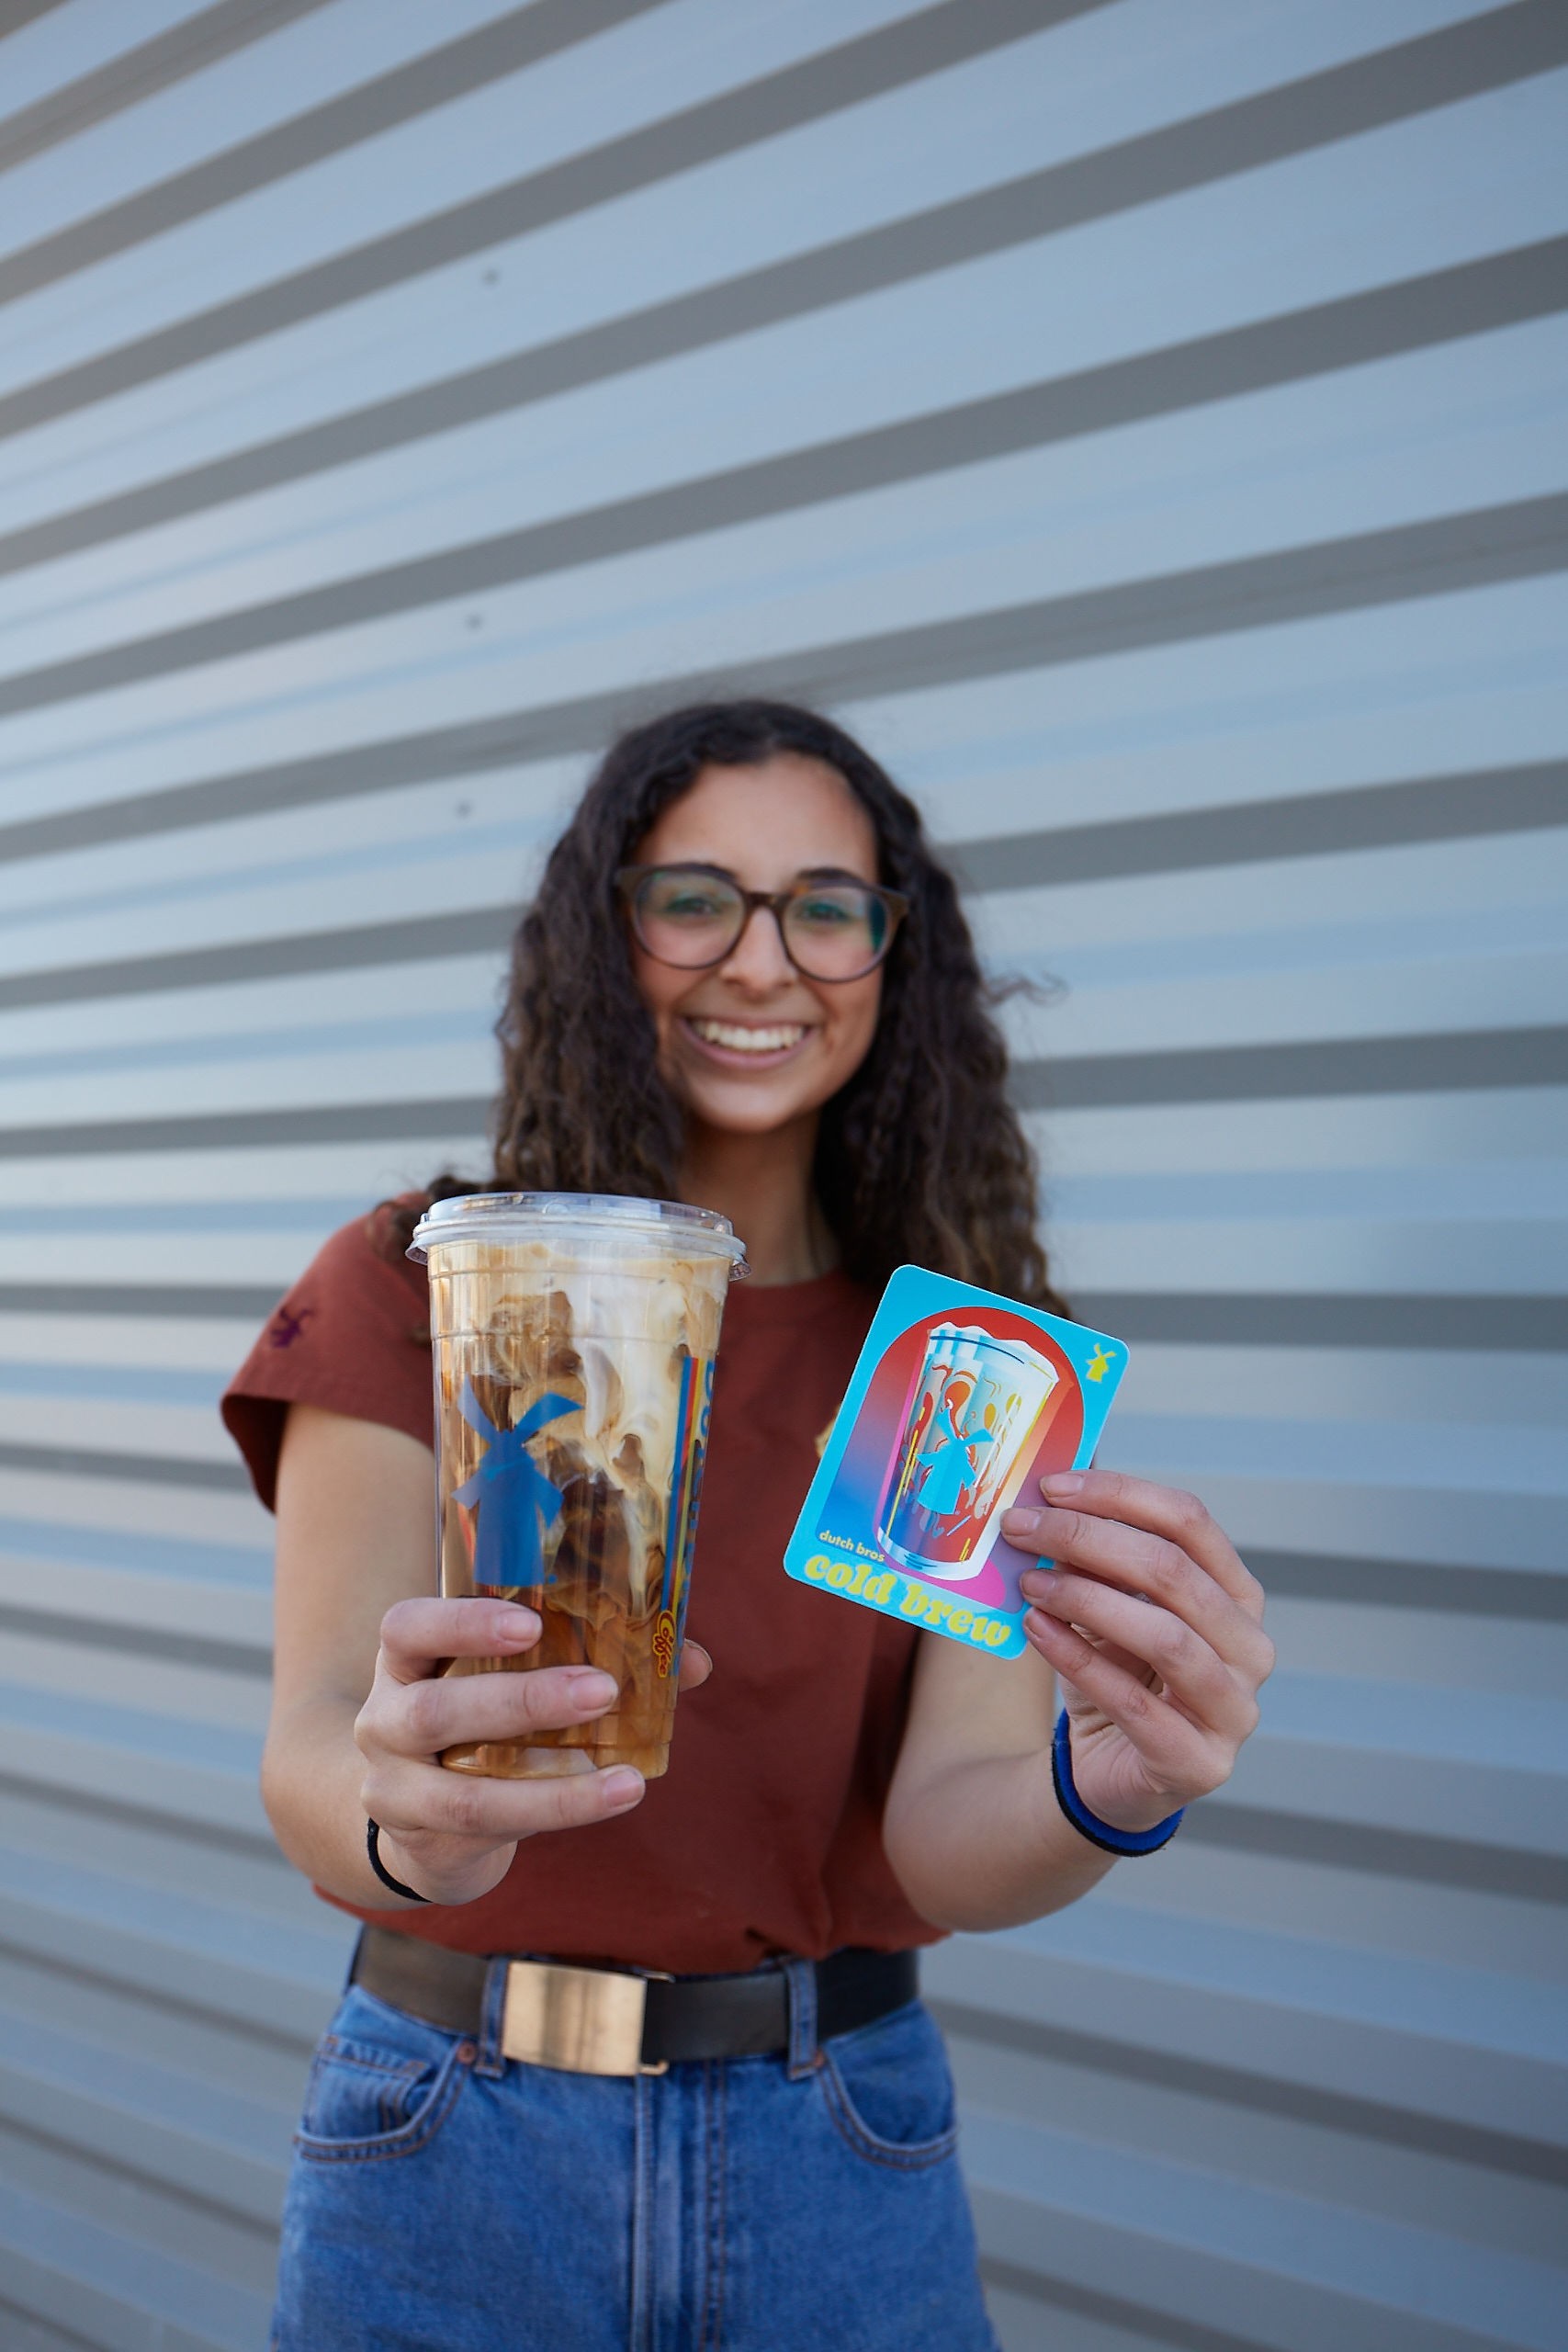 Cold Brew lovers can also celebrate with exclusive Dutch Bros app stickers with Cold Brew purchases